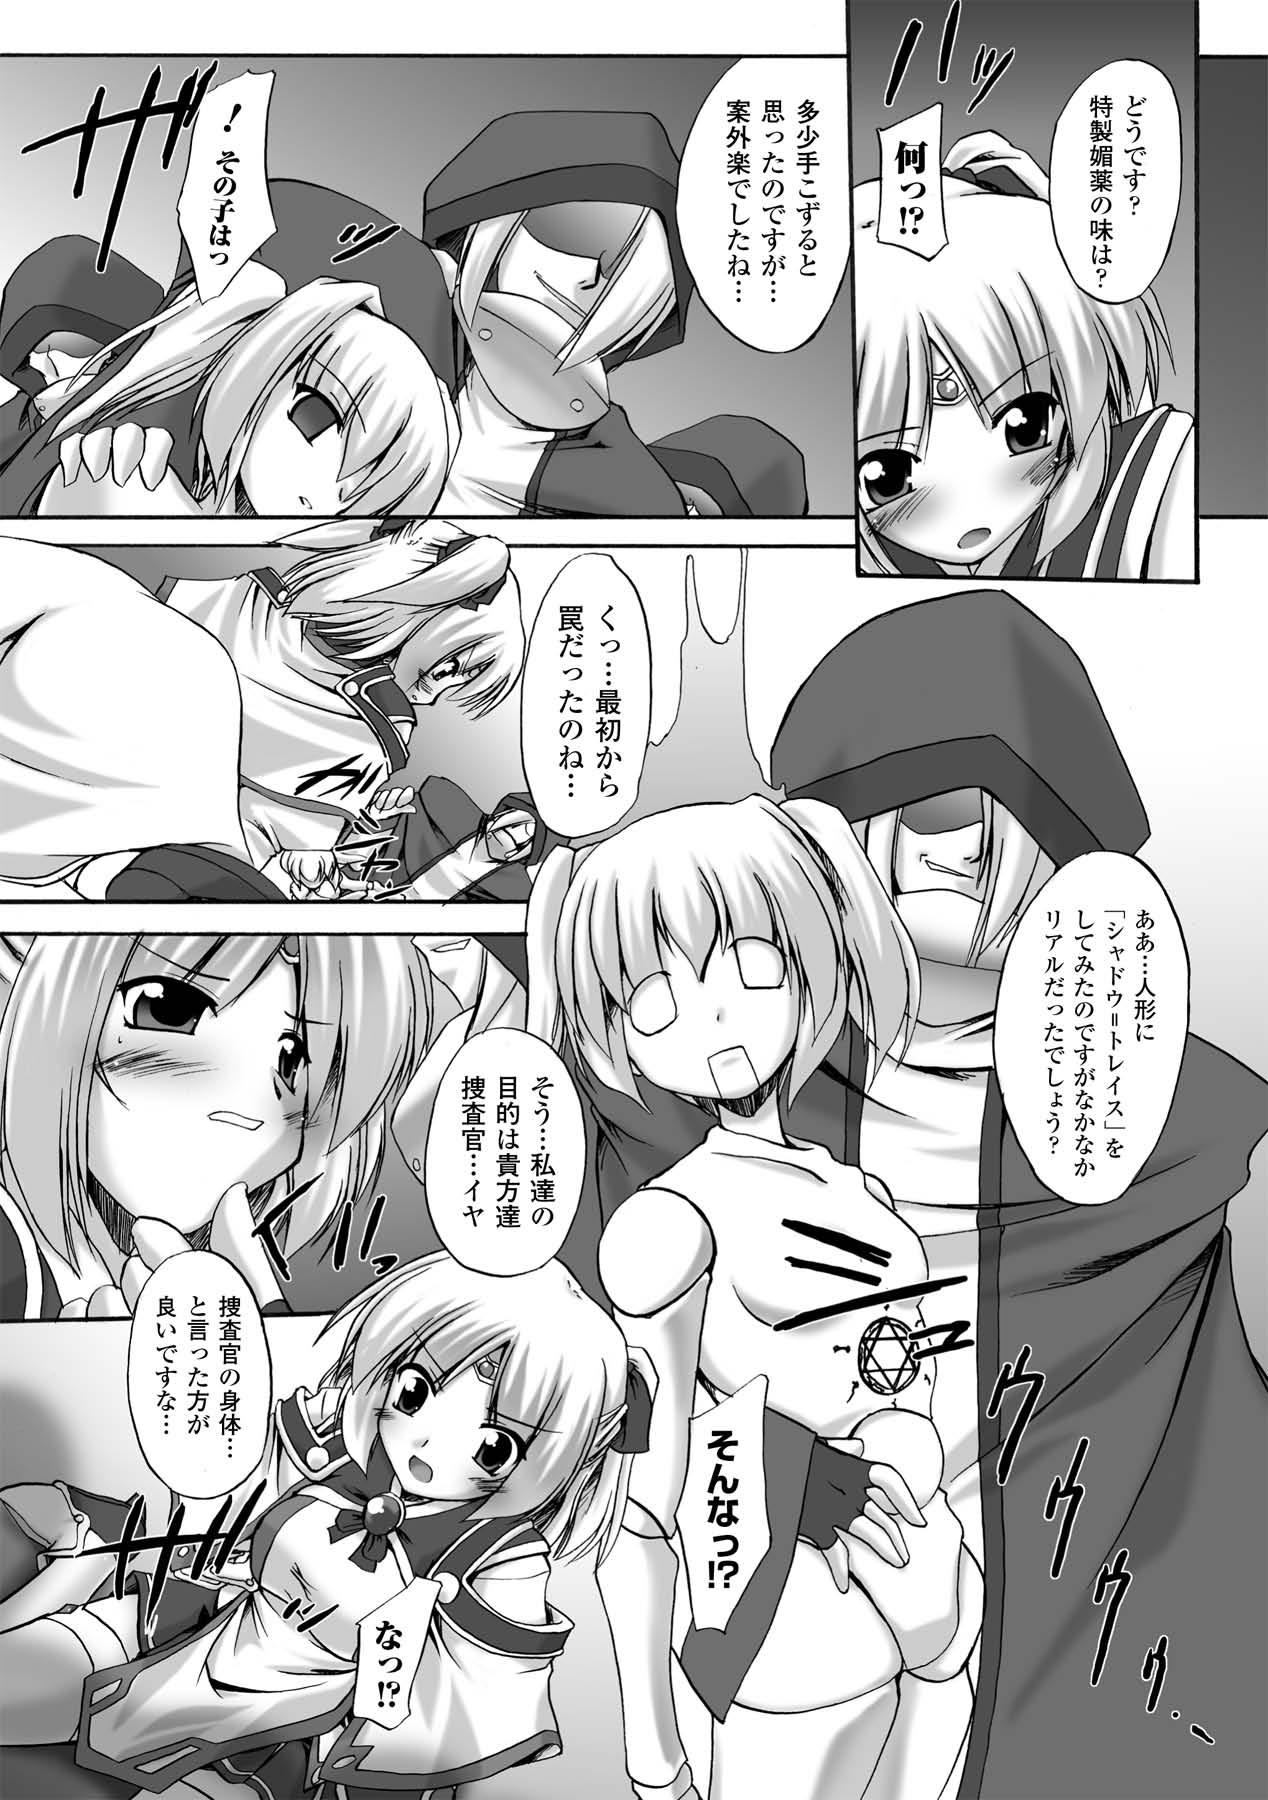 Speculum Indecency Magic - Mahou shoujo sae Blackdick - Page 10